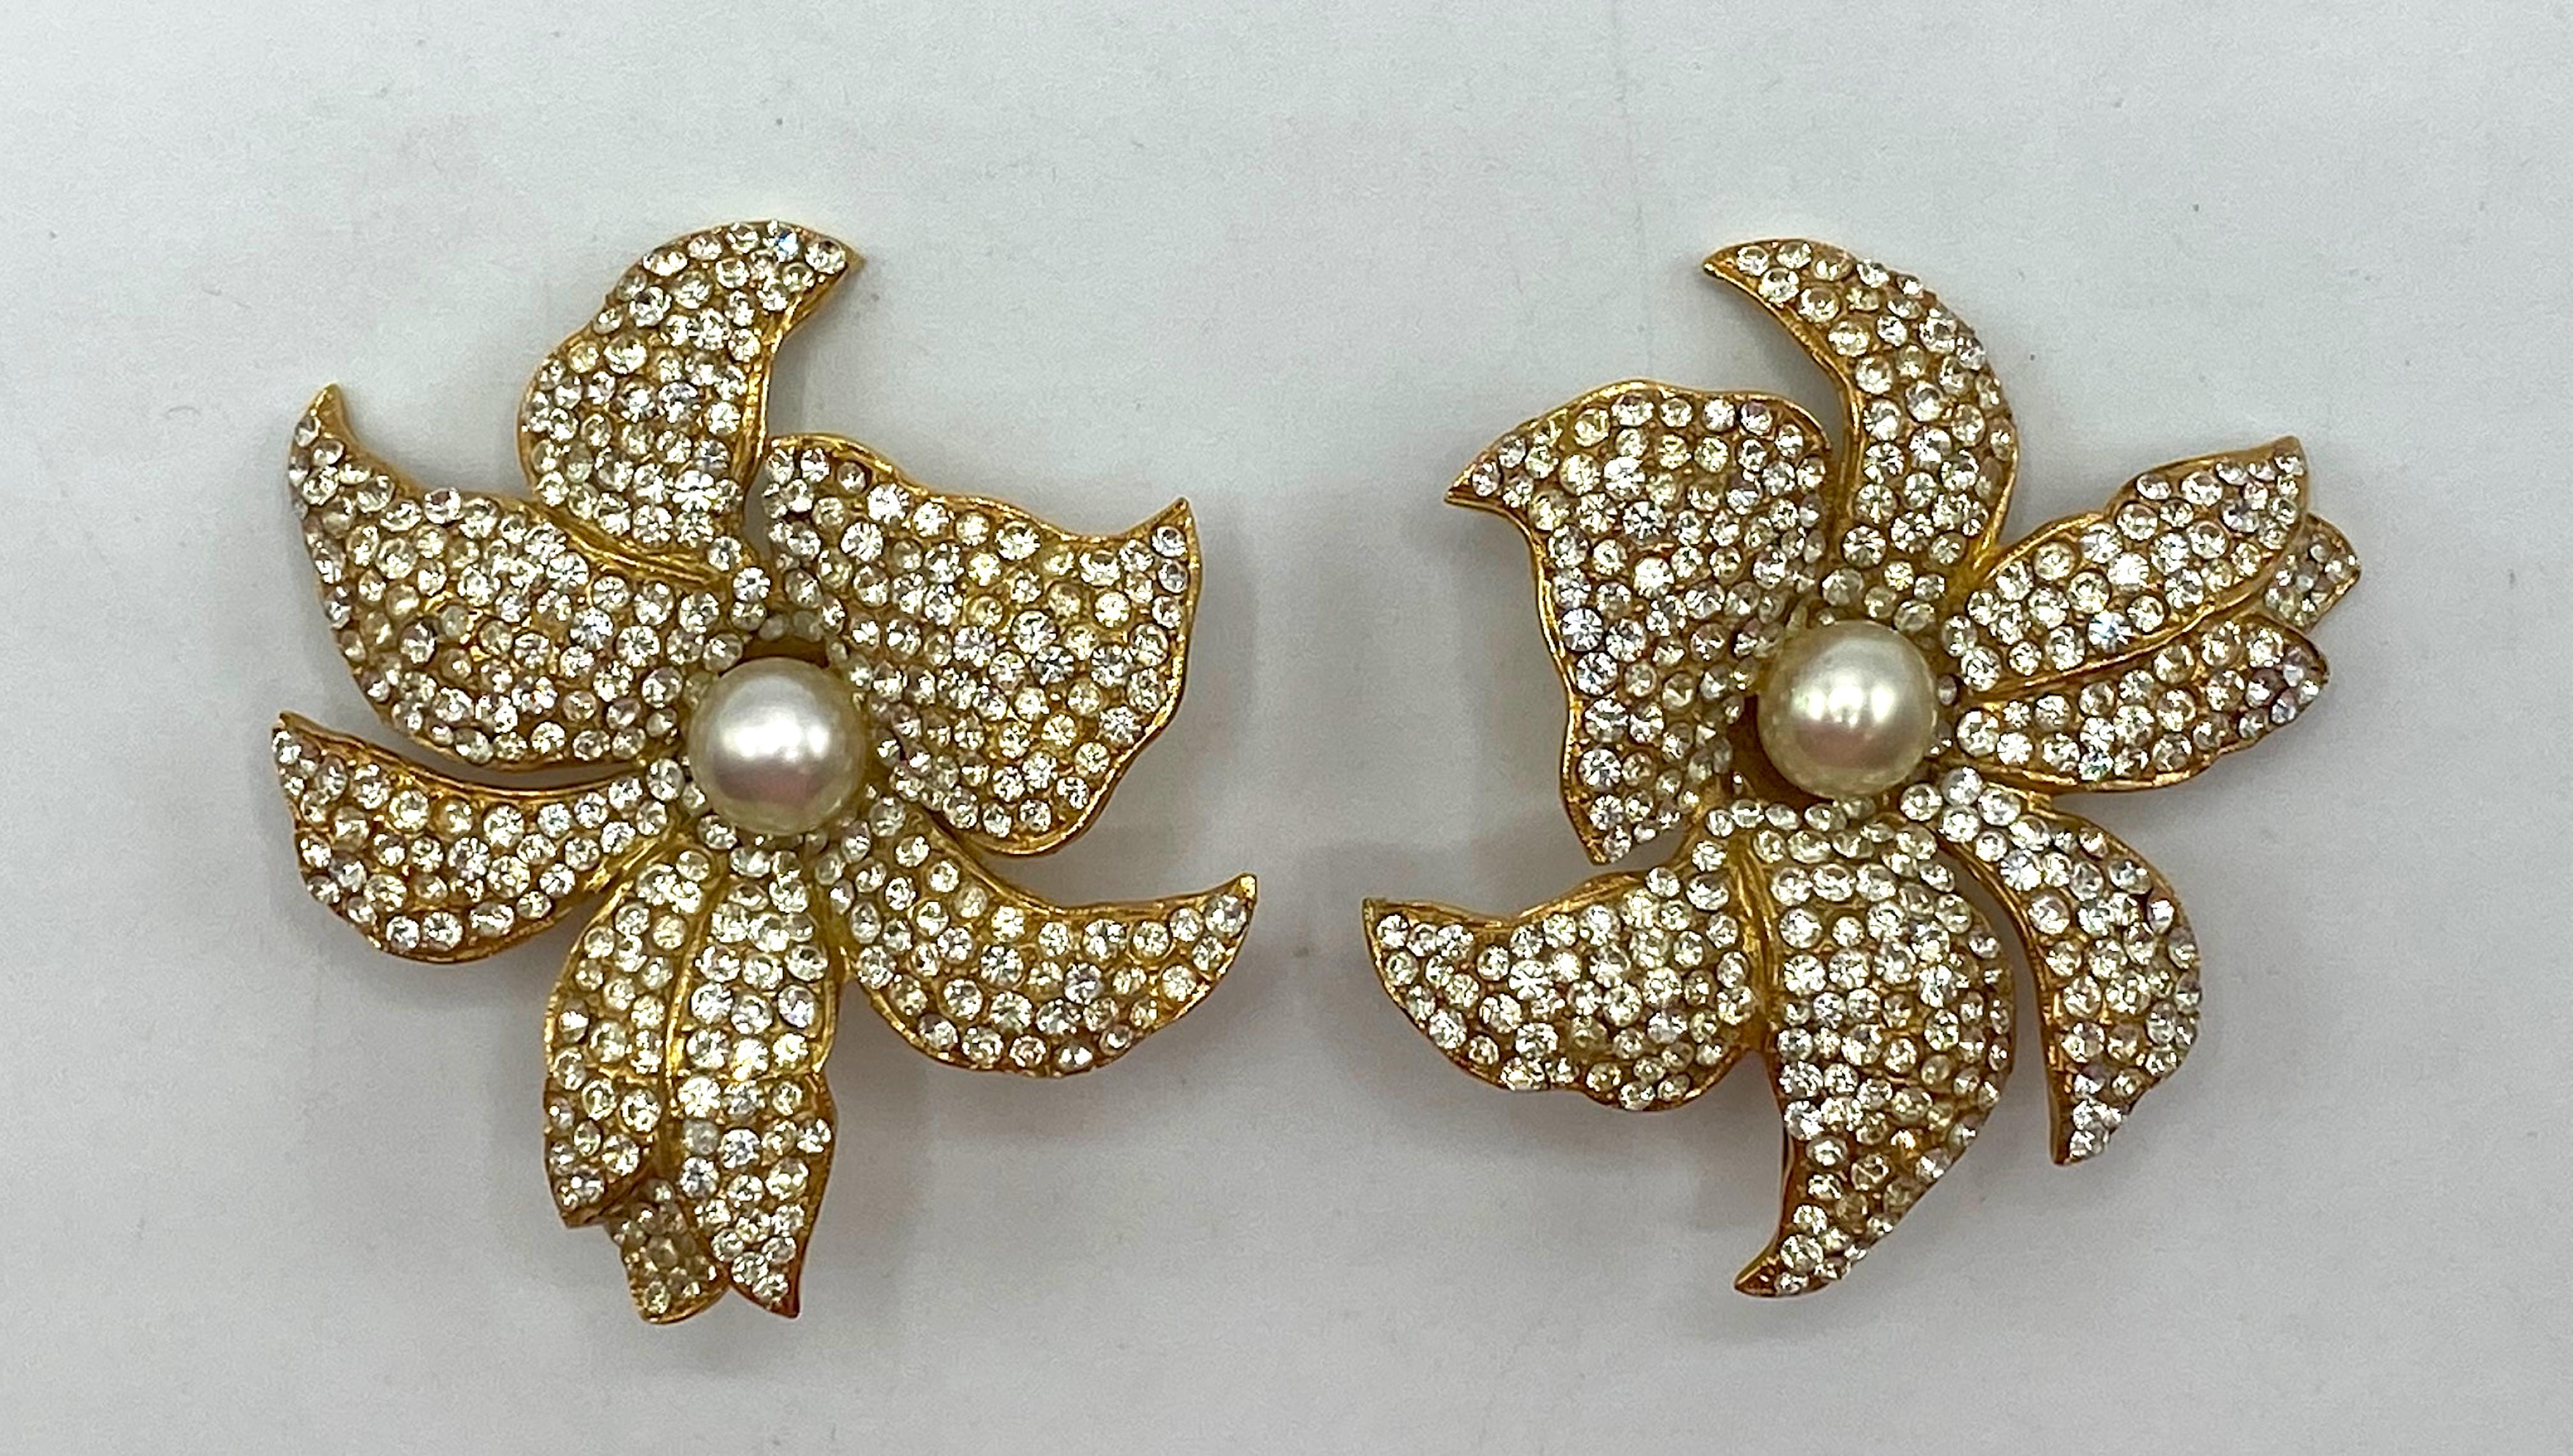 From the venerable fashion house, Borbonese, presented is this beautiful pair large flower earrings from the 1980s. The earrings are fashioned with a right and a left earring to compliment each other and intentionally not be identical when worn. The